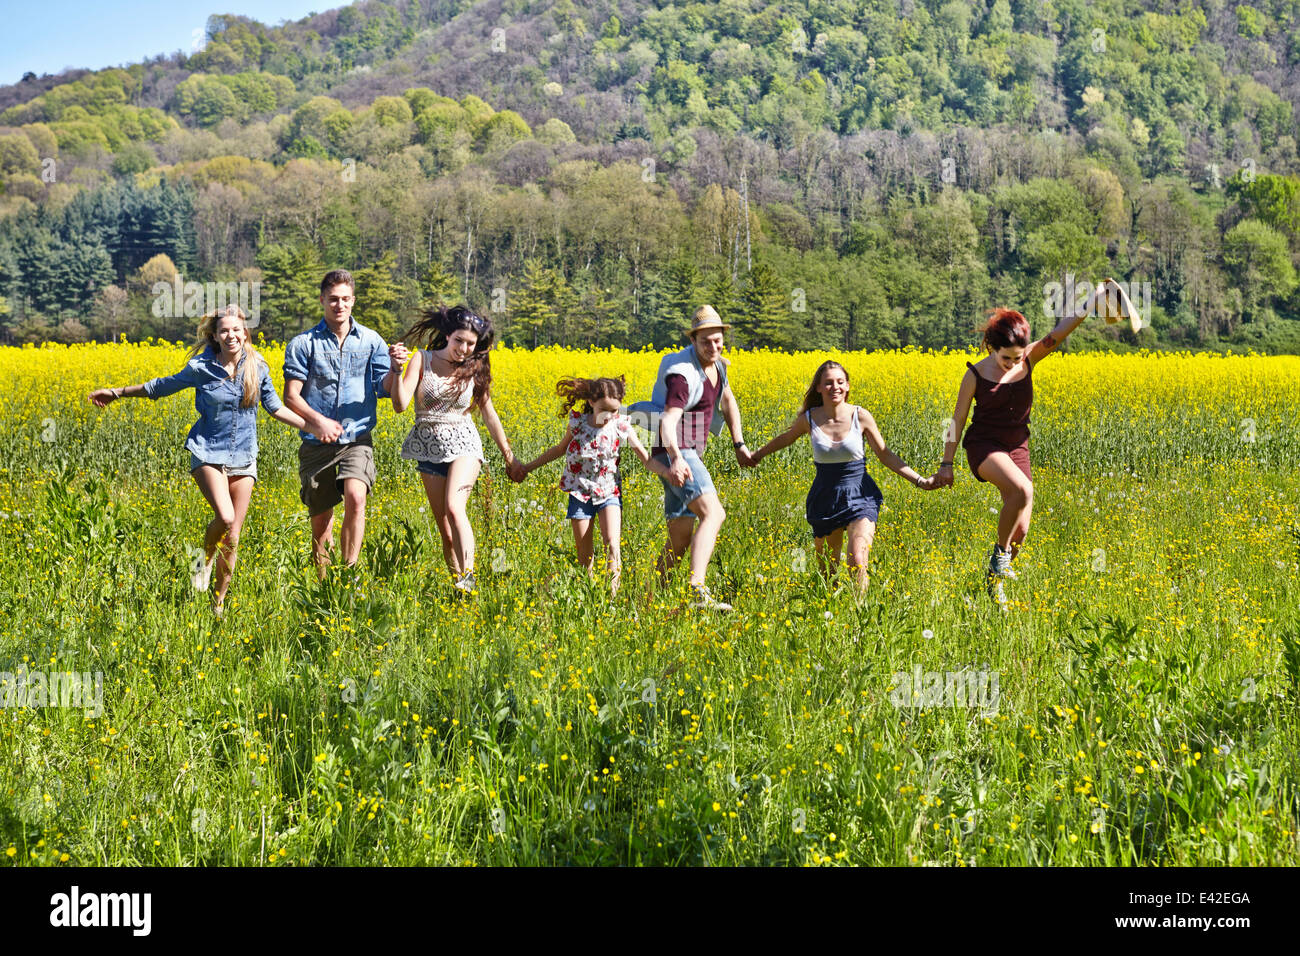 Group of friends running in field Stock Photo